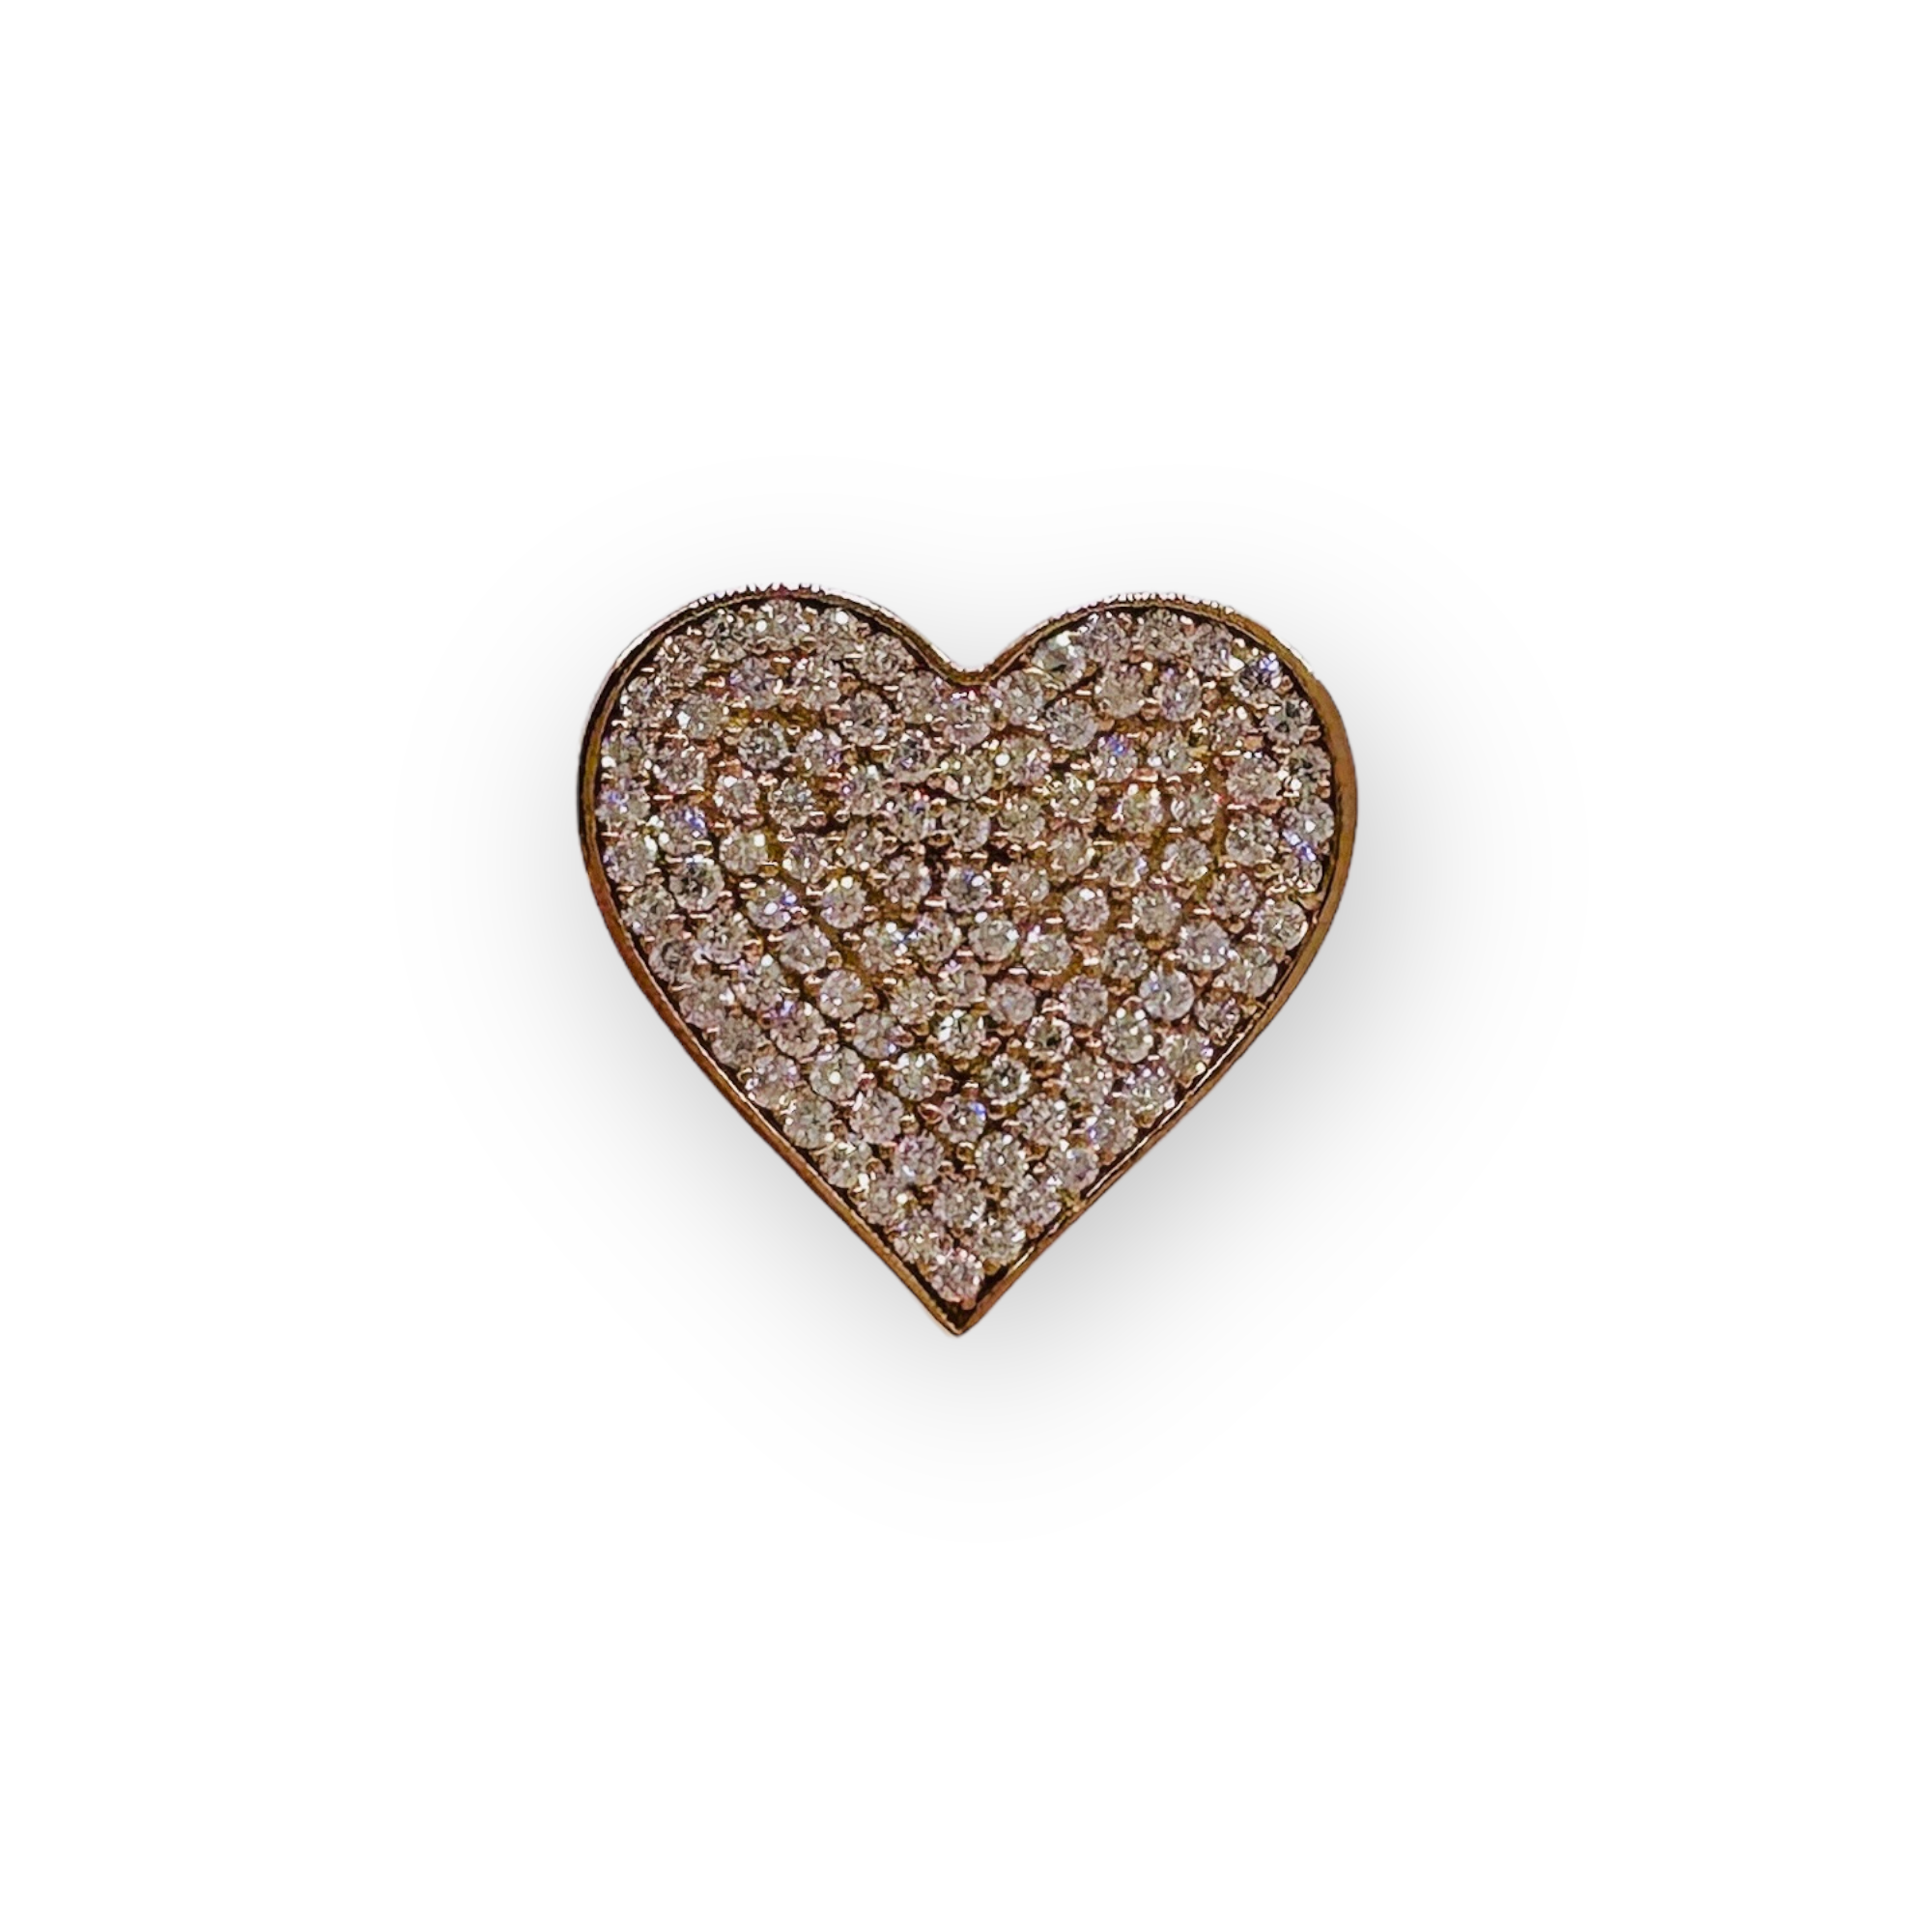 WD950 14kt Yellow gold pave Heart Ring